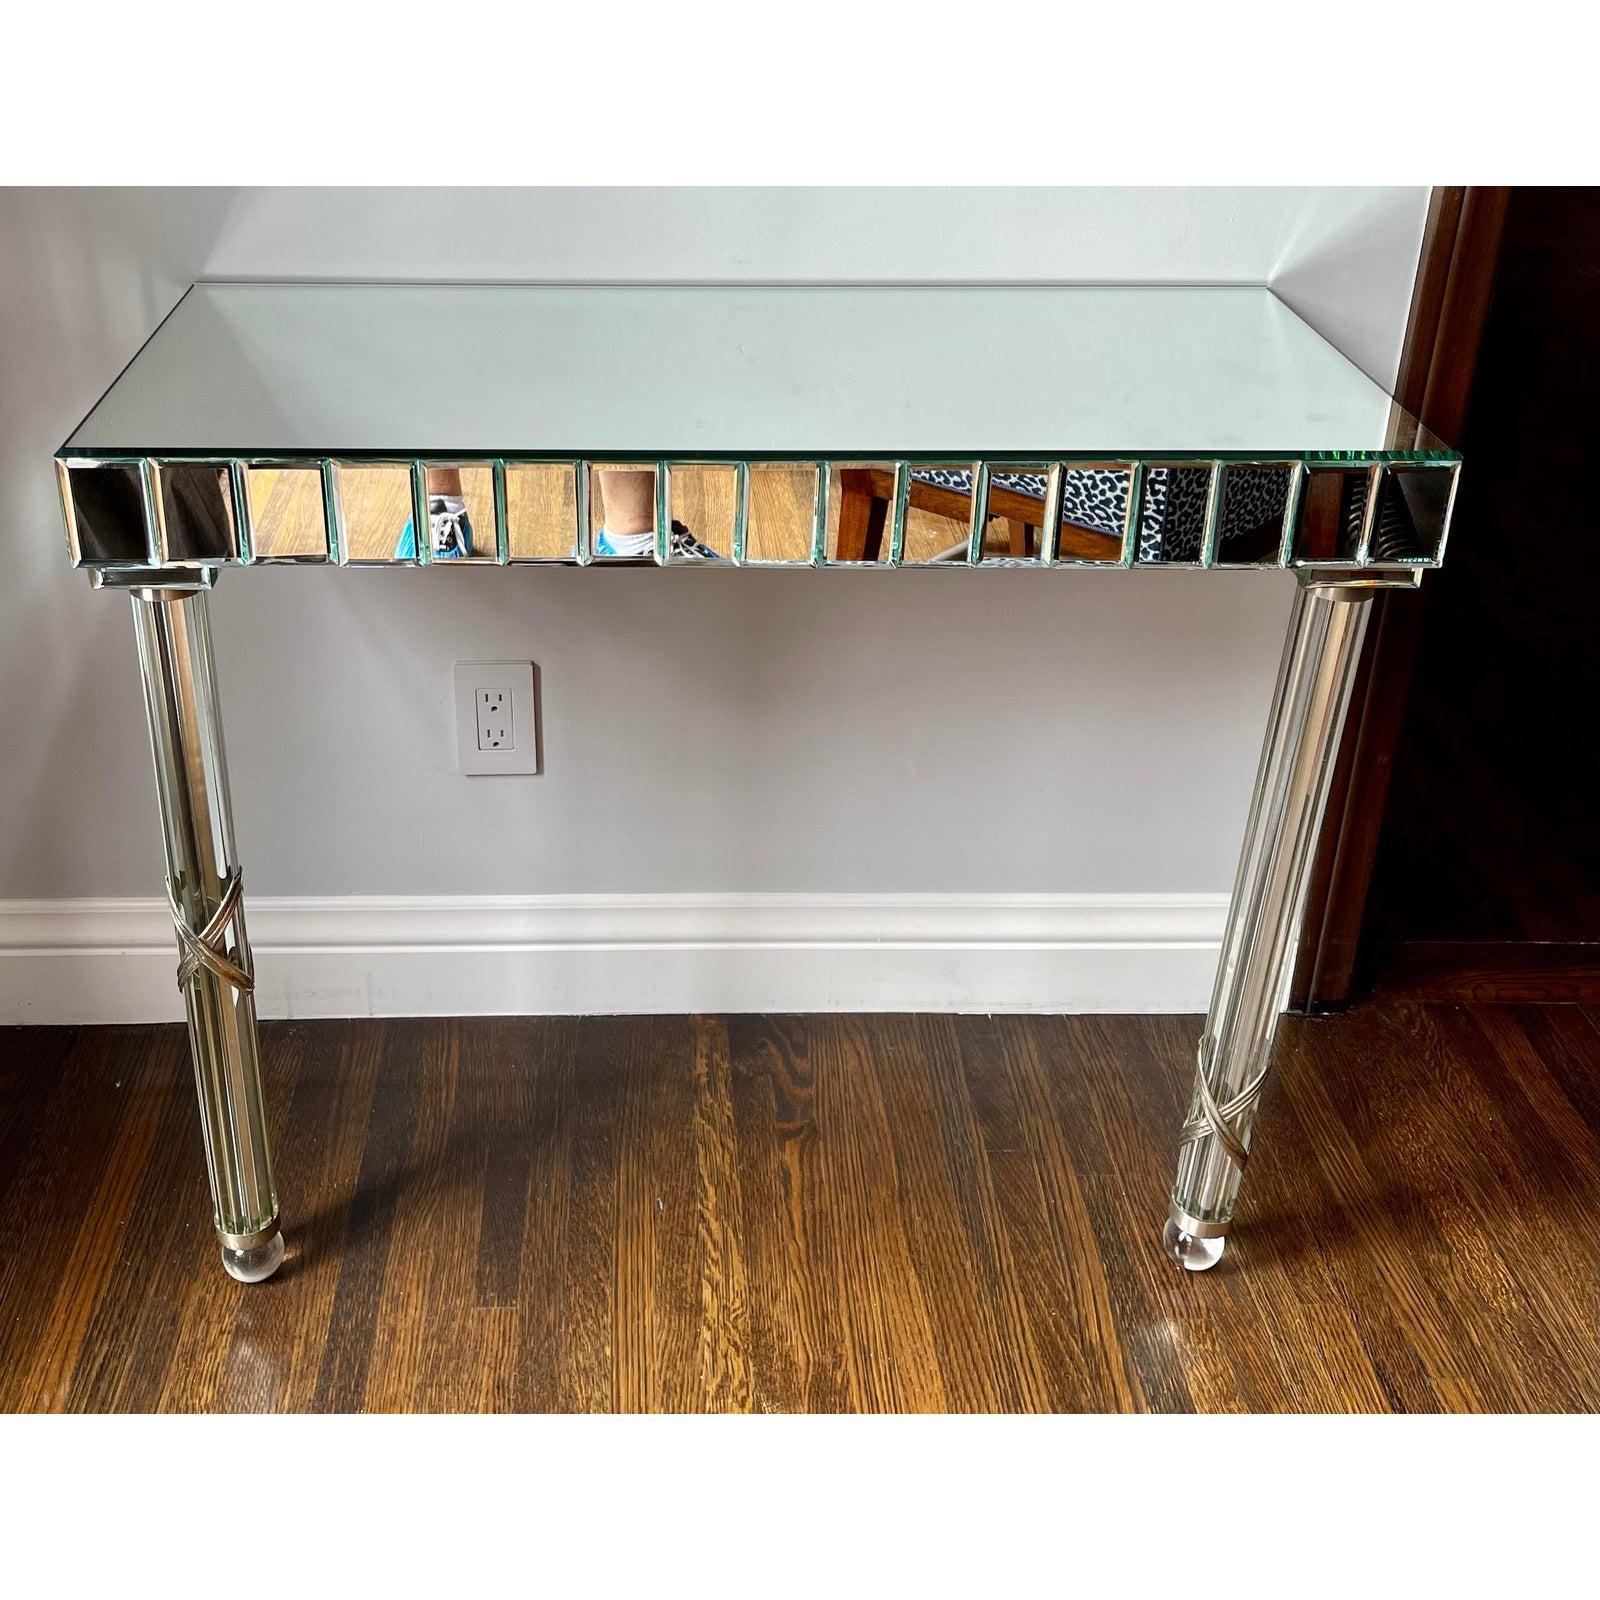 Pair of Antique Art Deco mirrored console table. It features glass rod legs clad in silver.

Additional information:
Materials: Mirror, Wood
Color: Silver
Period: 1940s
Styles: Art Deco
Table Shape: Rectangle
Item Type: Vintage, Antique or